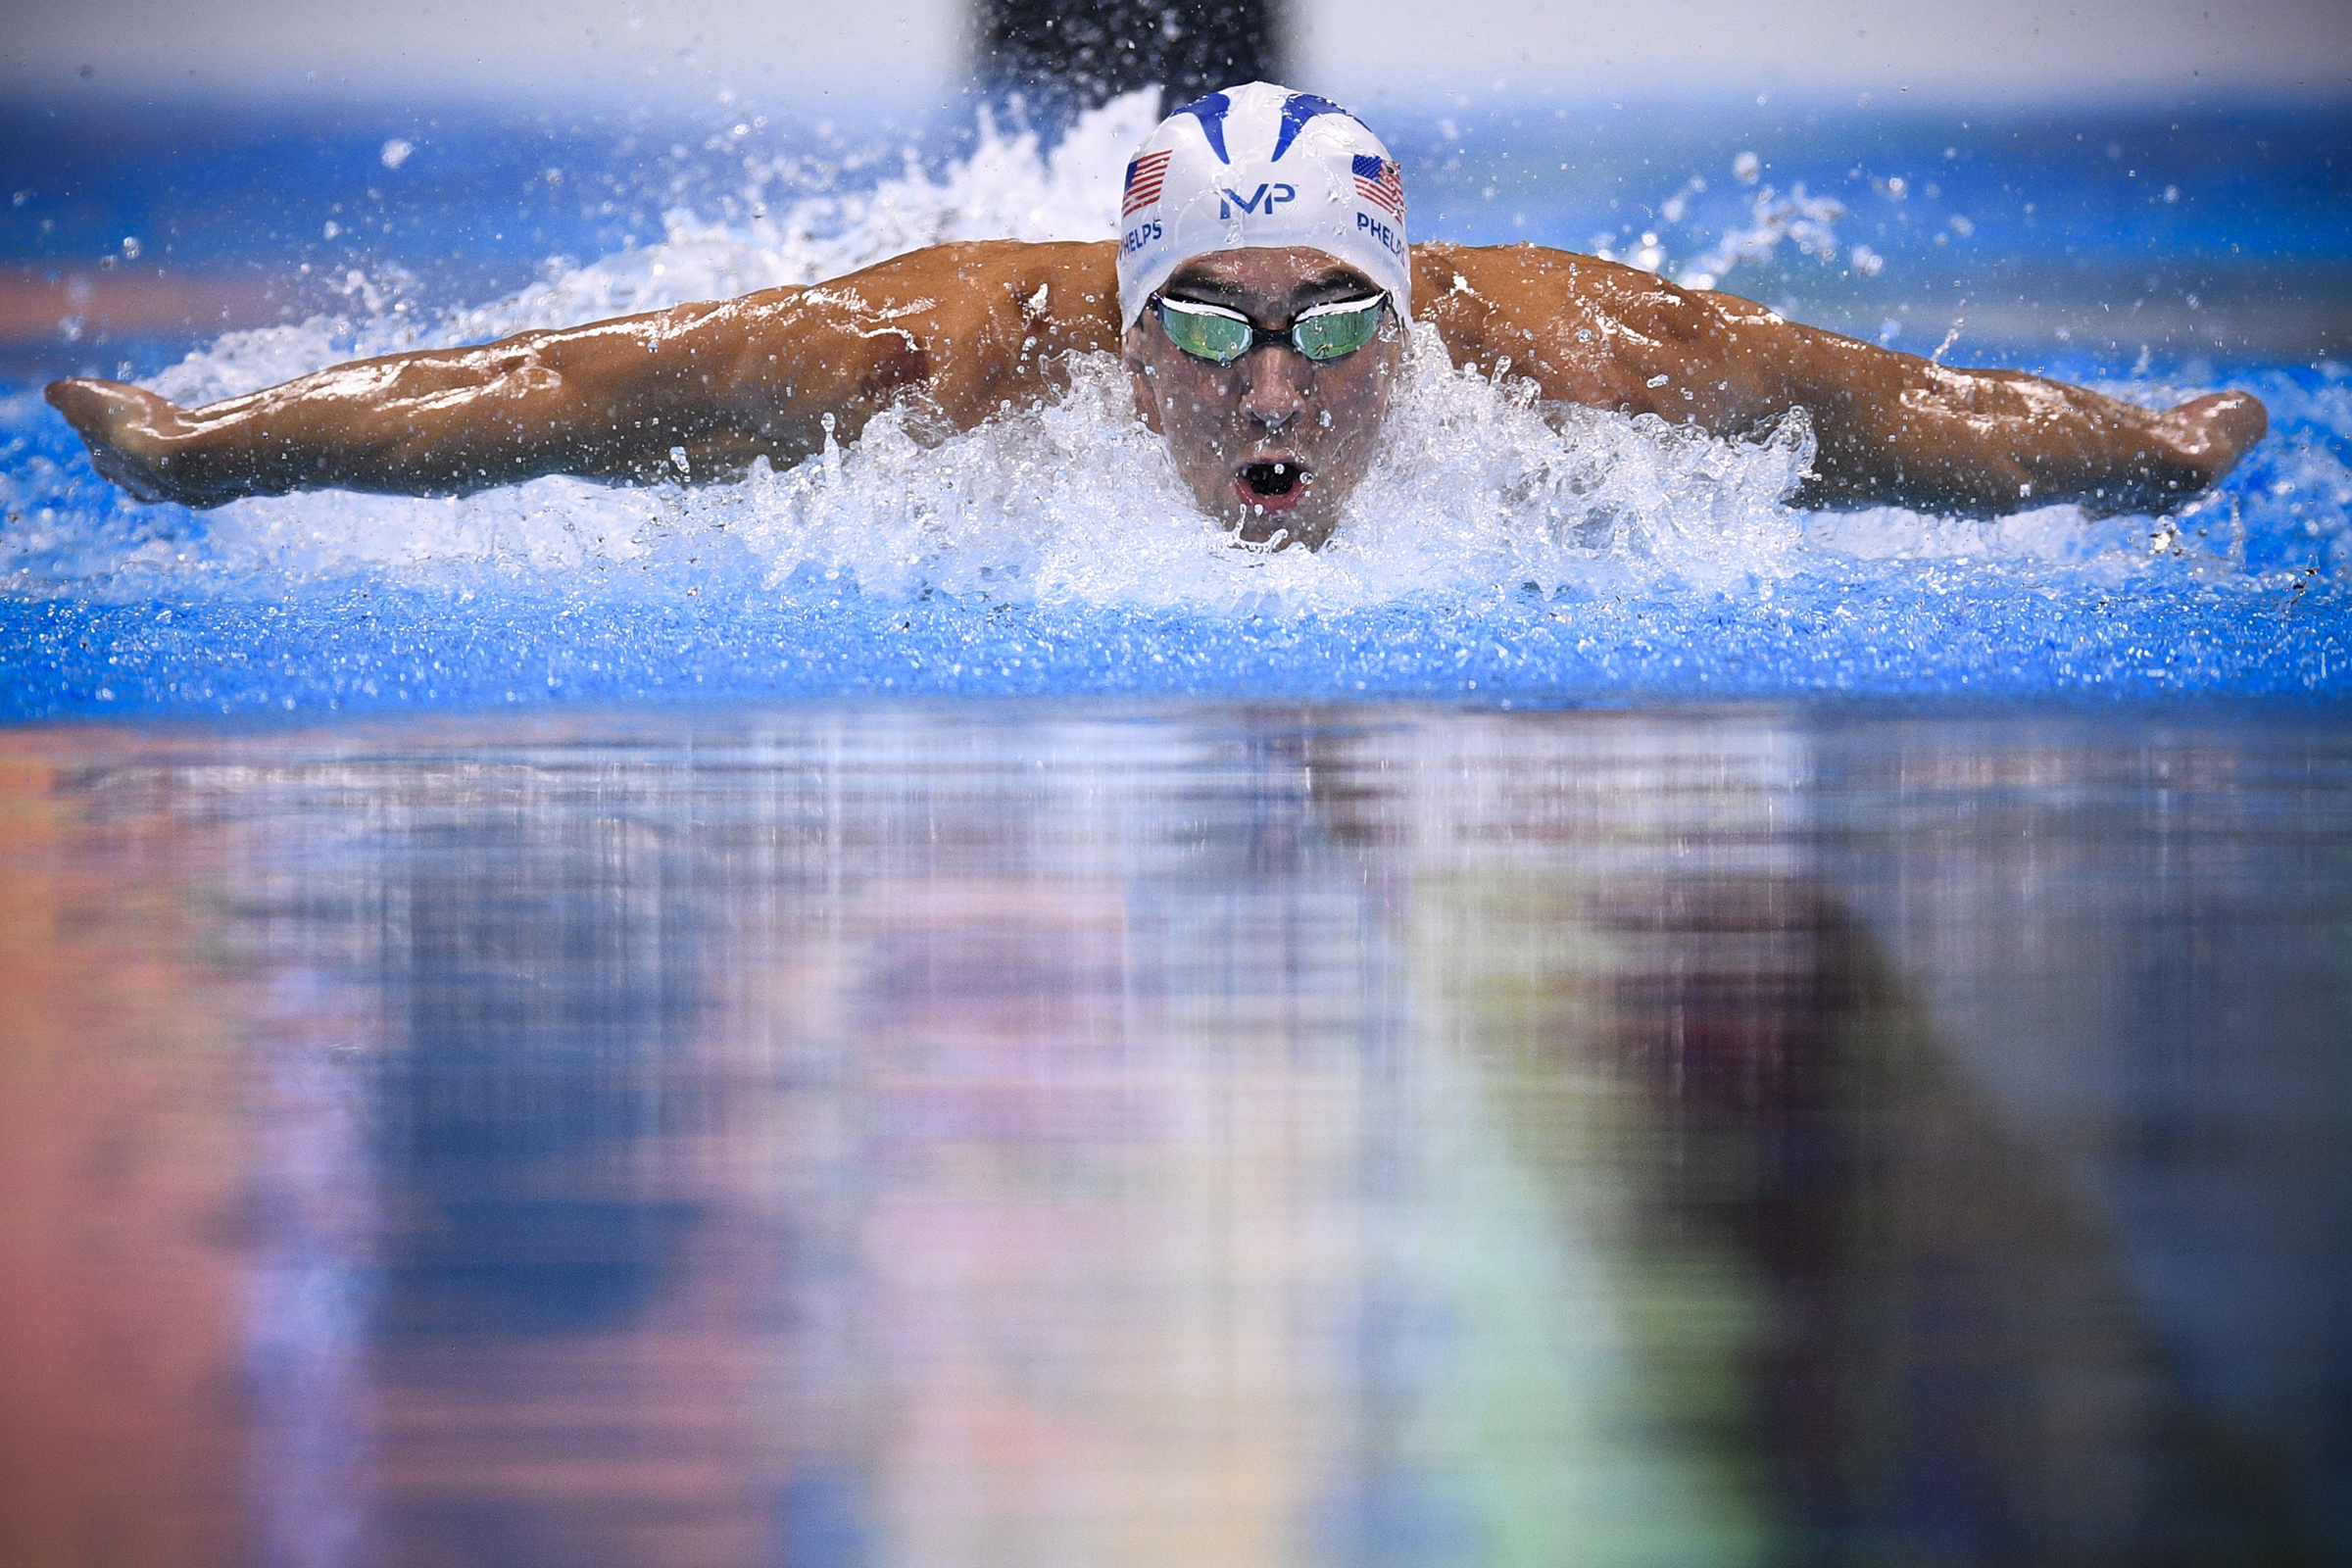 USA's Michael Phelps competes in a Men's 200m Individual Medley heat during the swimming event at the Rio 2016 Olympic Games at the Olympic Aquatics Stadium in Rio de Janeiro on August 10, 2016.   / AFP PHOTO / Martin BUREAU